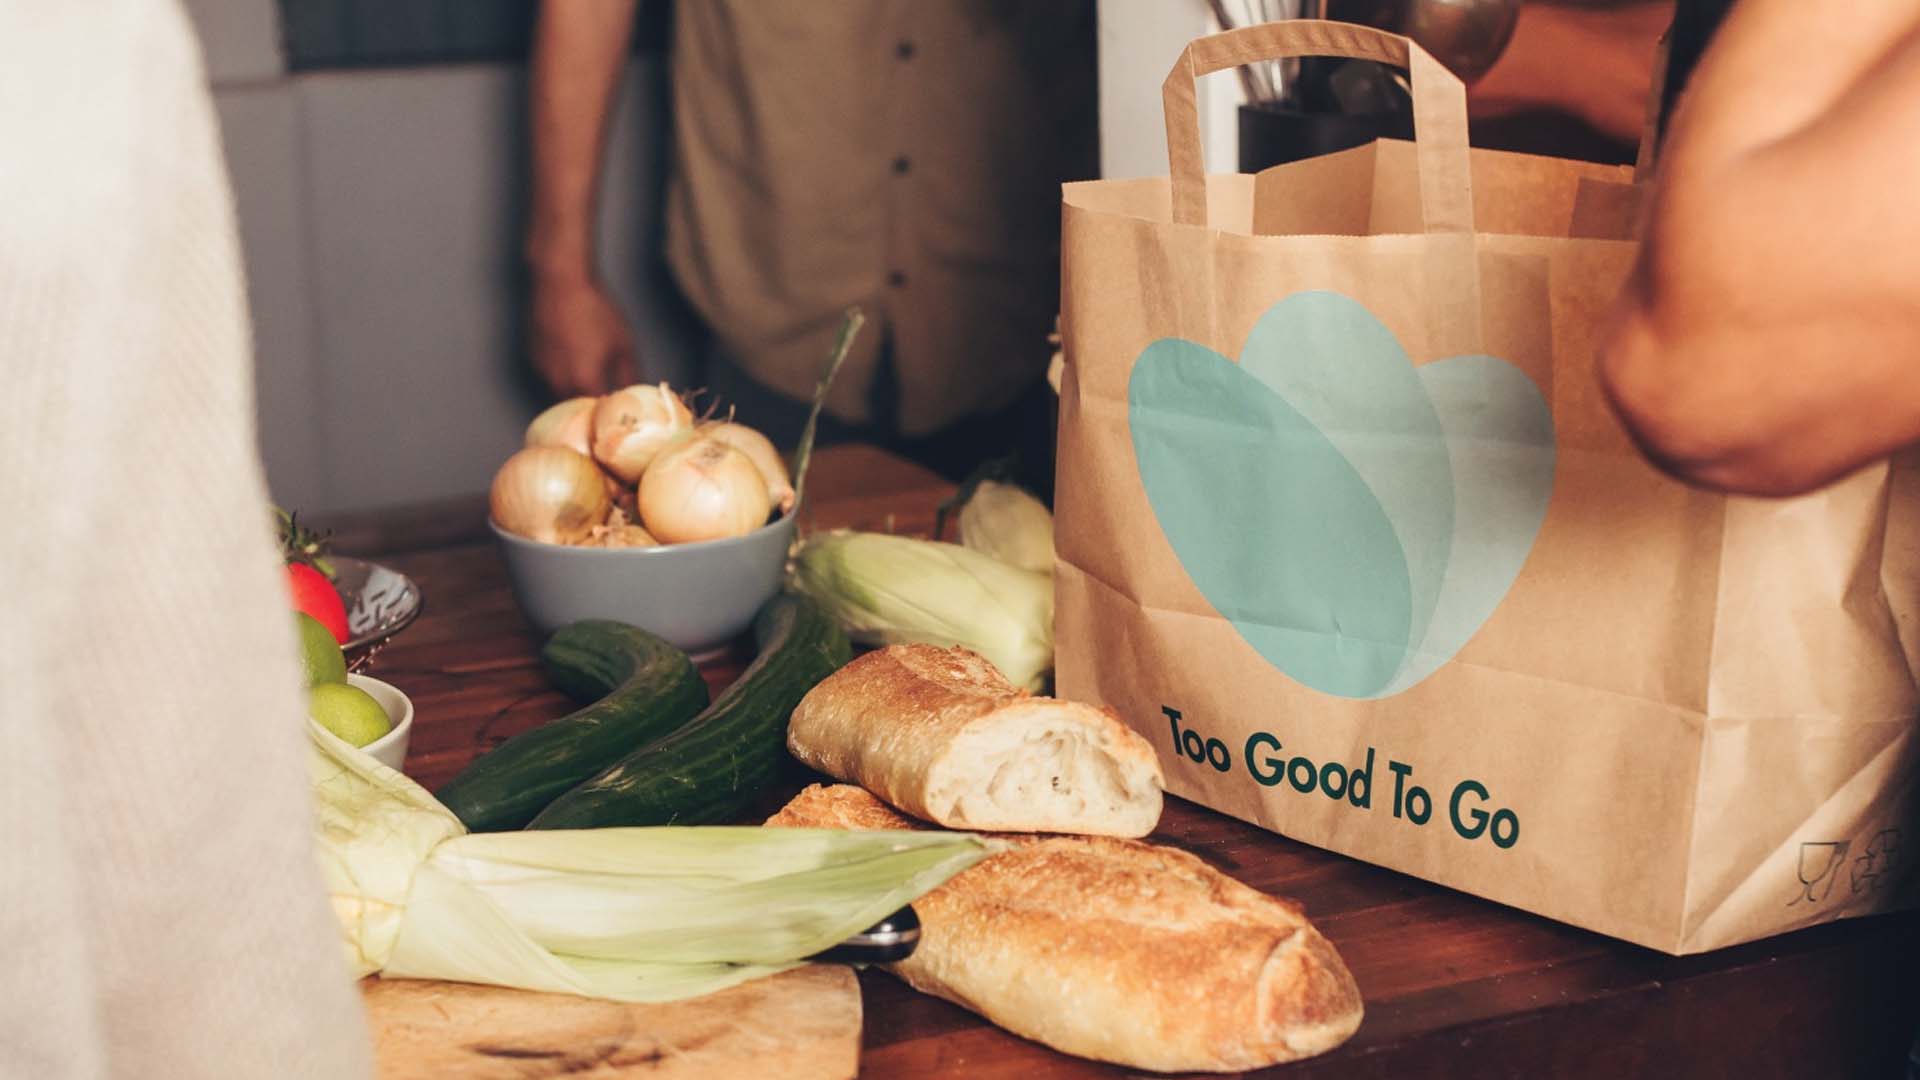 Too Good To Go reducing food waste as an innovative tech startup